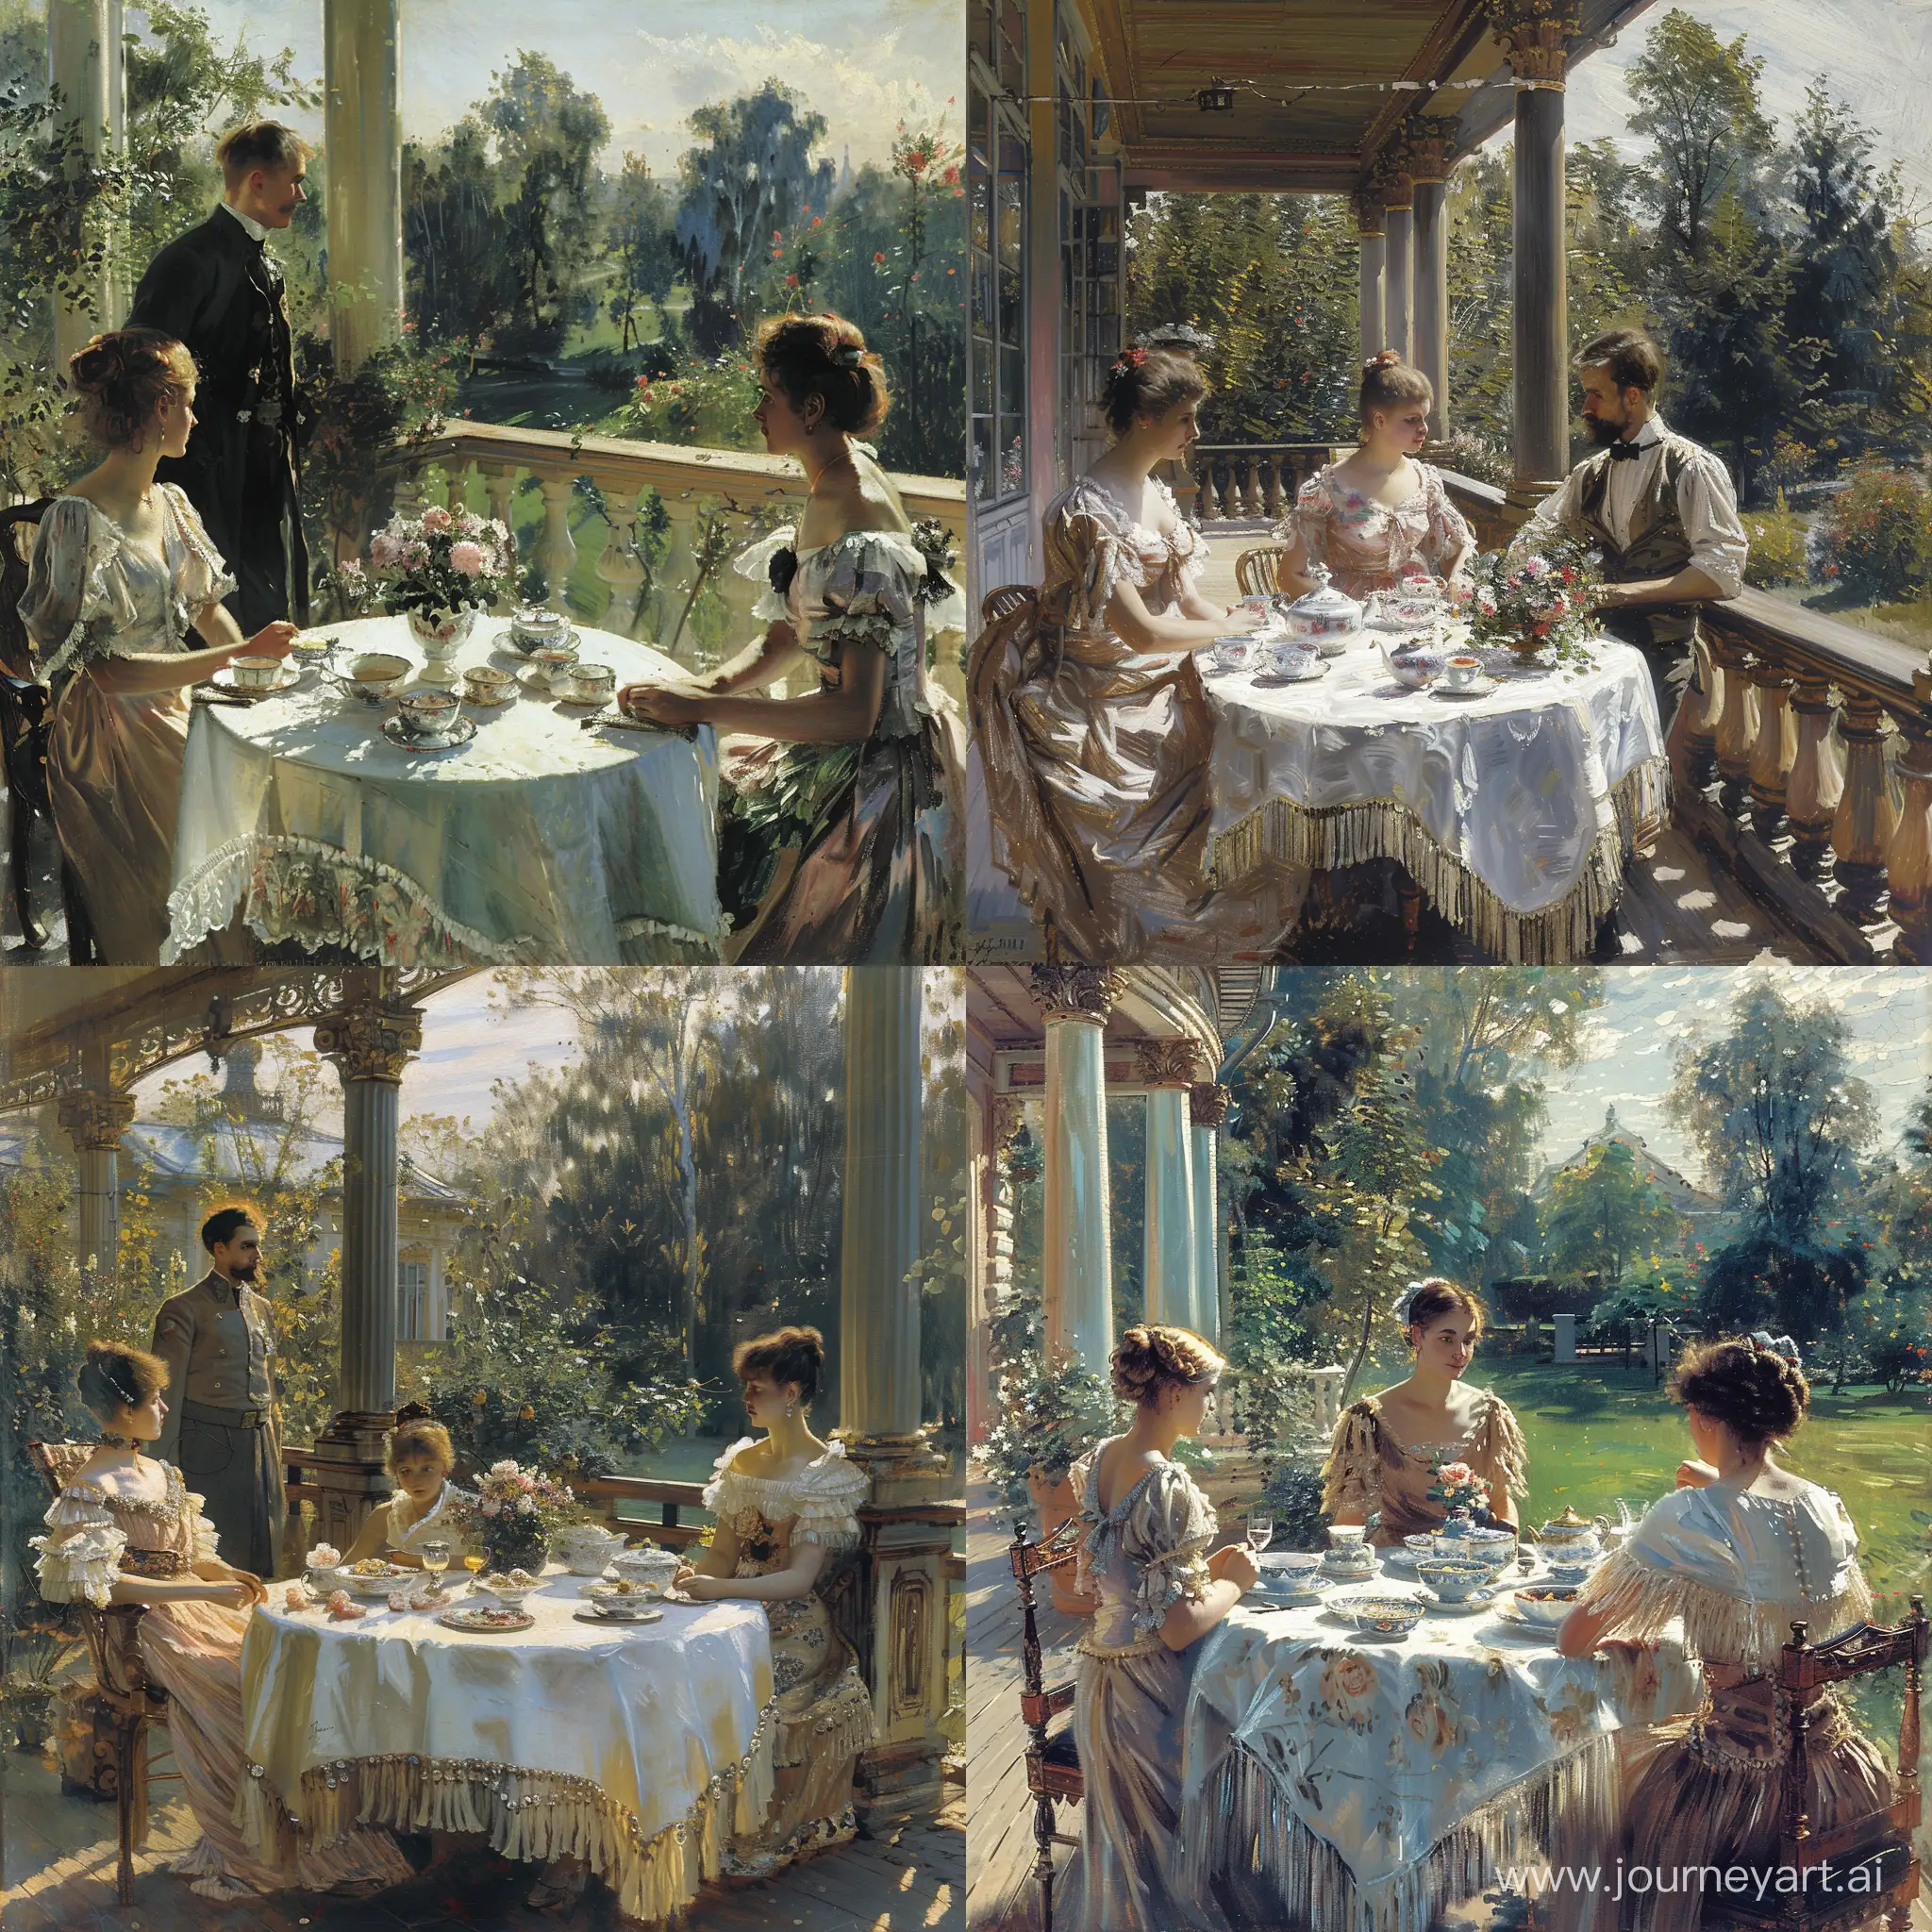 Impressionist style art. 19th century scene in the Russian Empire.  Early morning, on the veranda of a manor house, a noble family is having breakfast. Two women in simple tasseled dresses and a tall man sit at the table. On the table white tablecloth, porcelain dishes, flowers. Around the garden.